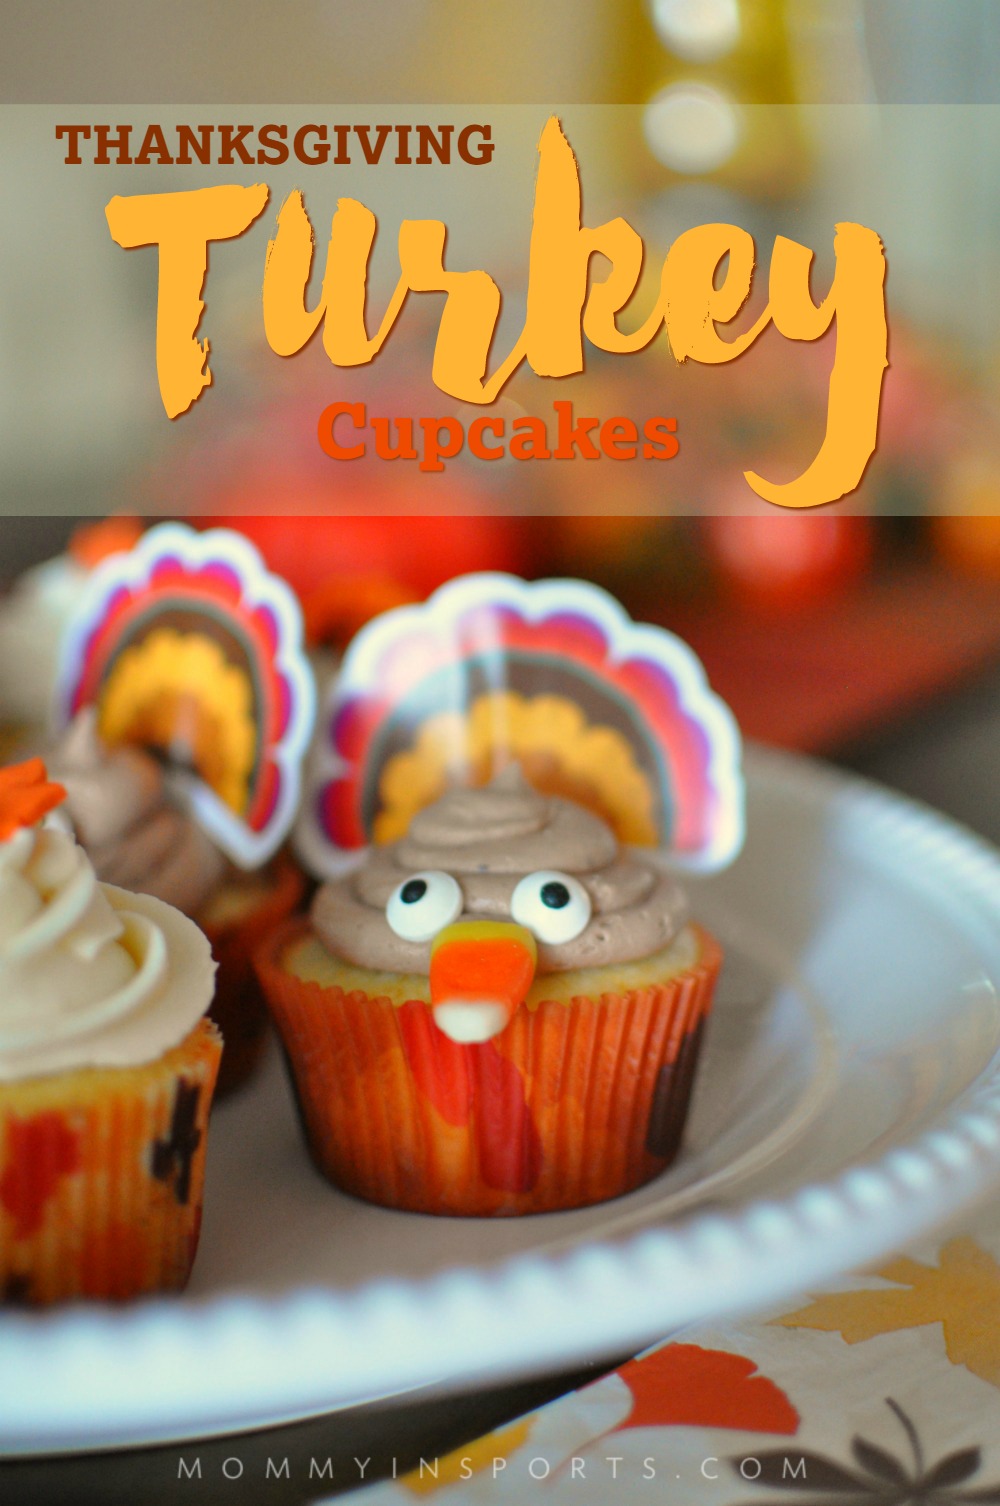 How To Bake Too Cute Thanksgiving Turkey Cupcakes